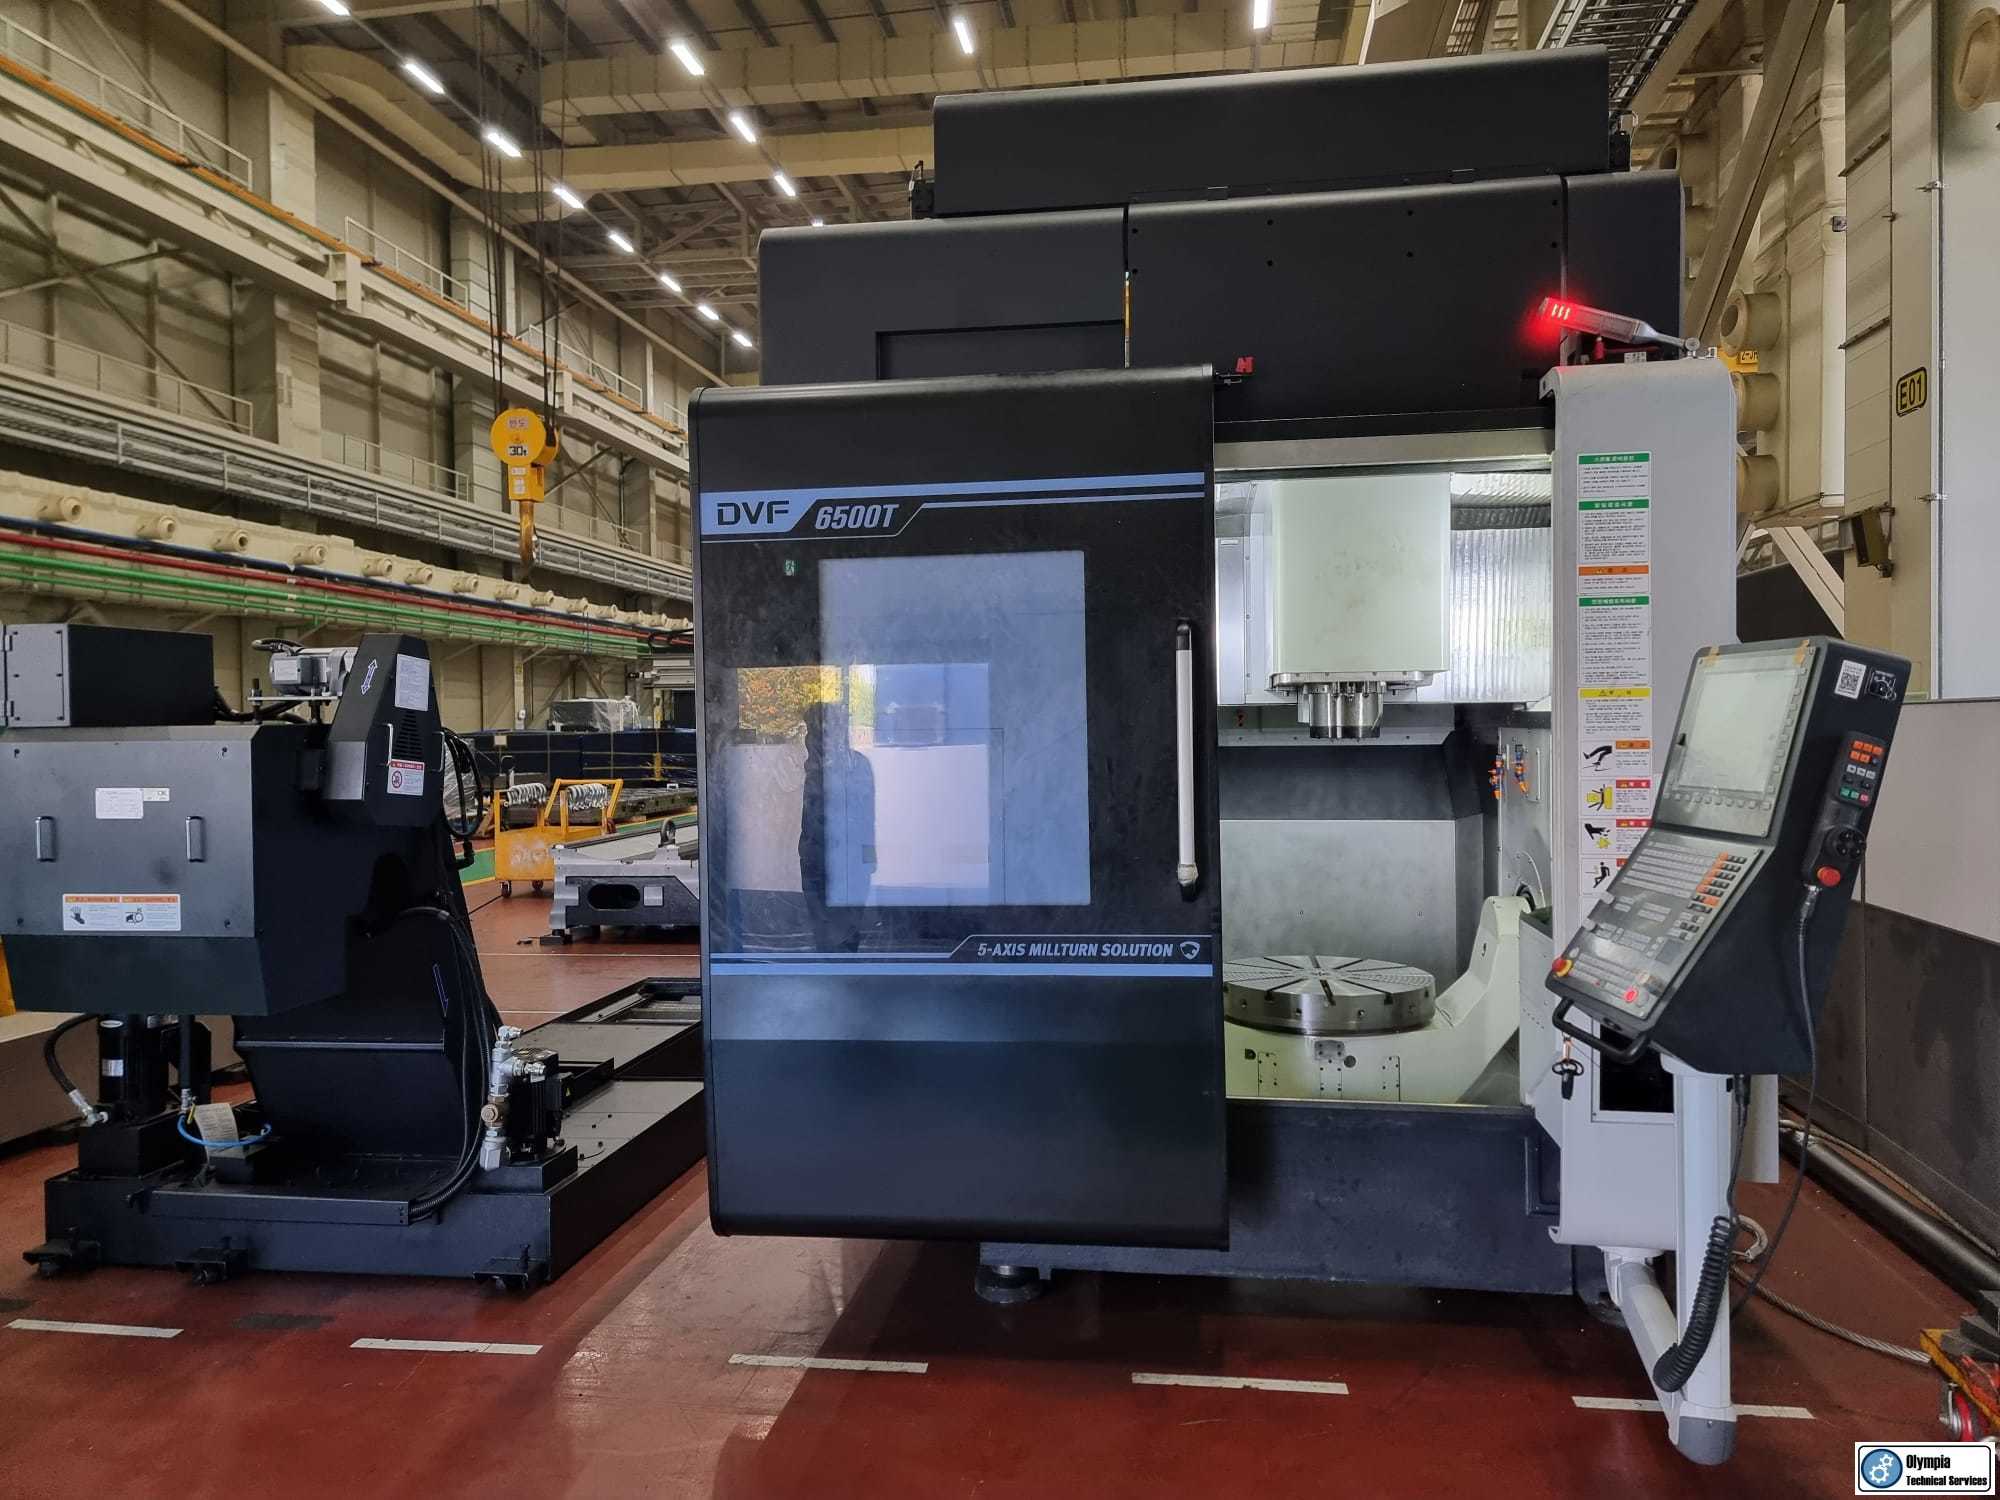 2022 DOOSAN DVF6500T Vertical Machining Centers (5-Axis or More) | Olympia Technical Services